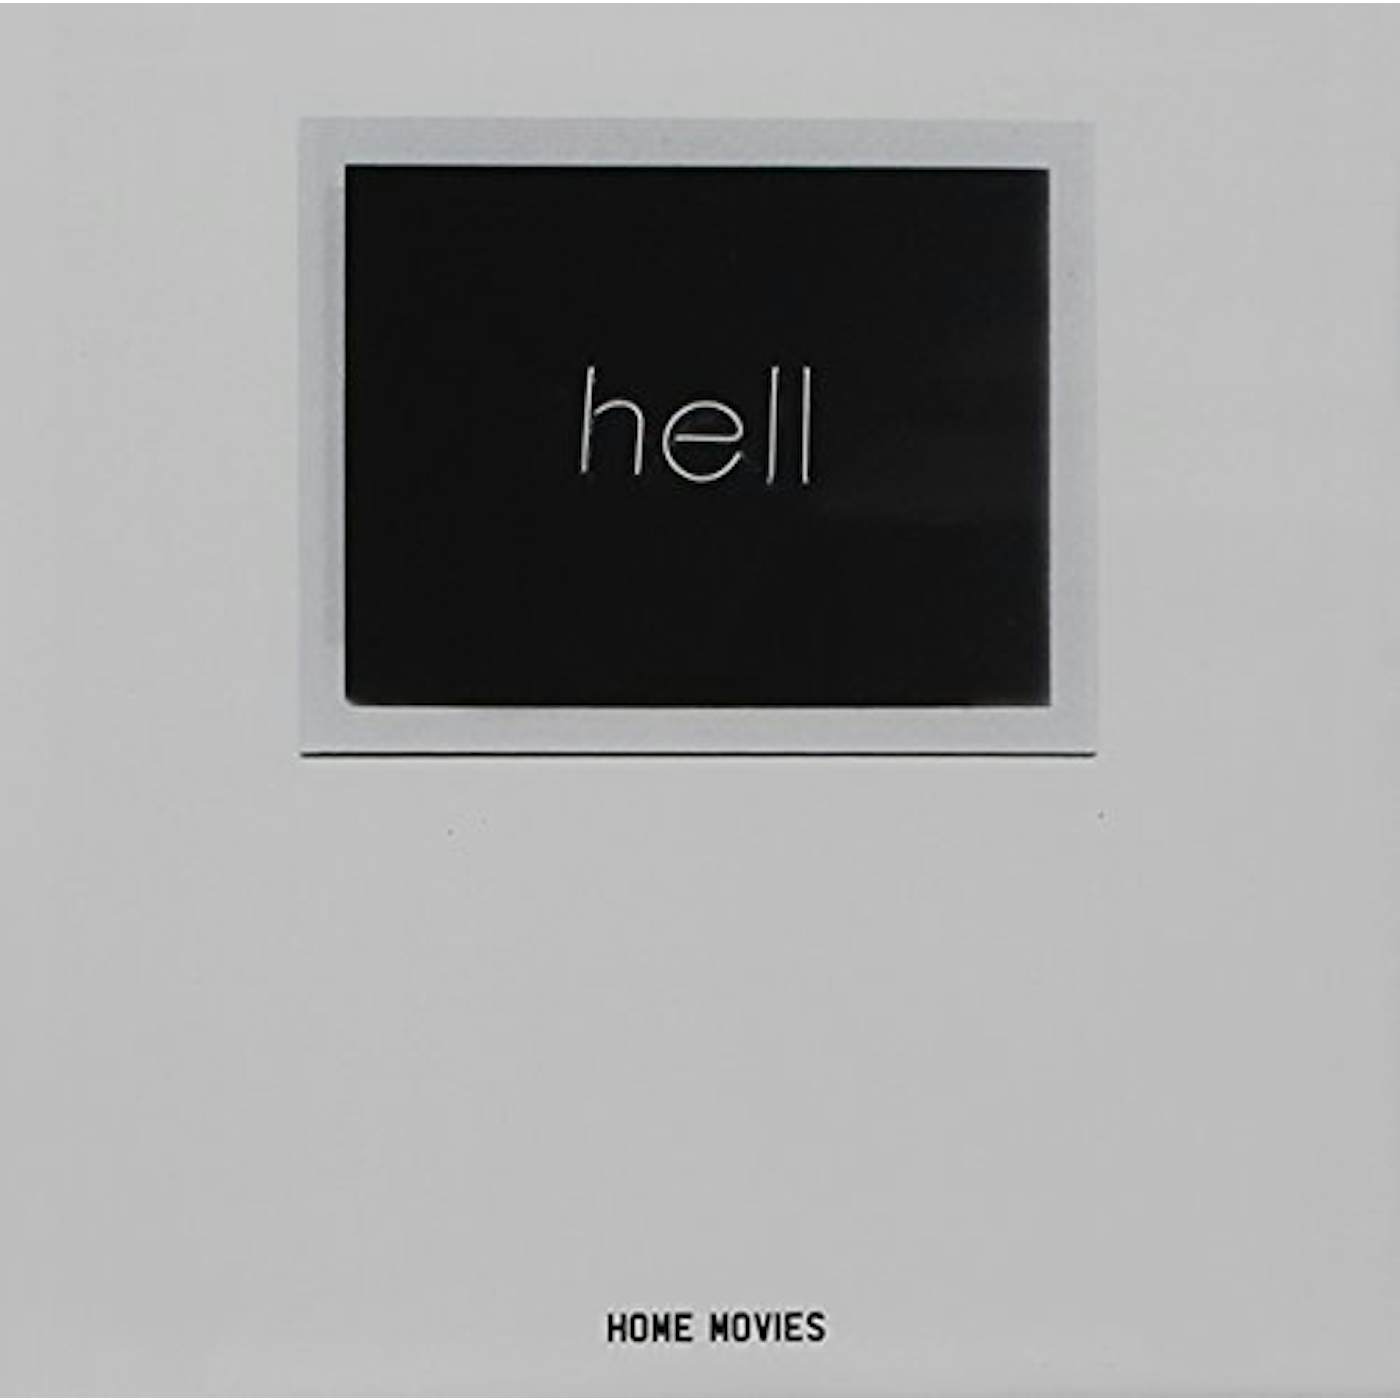 Home Movies HELL CD